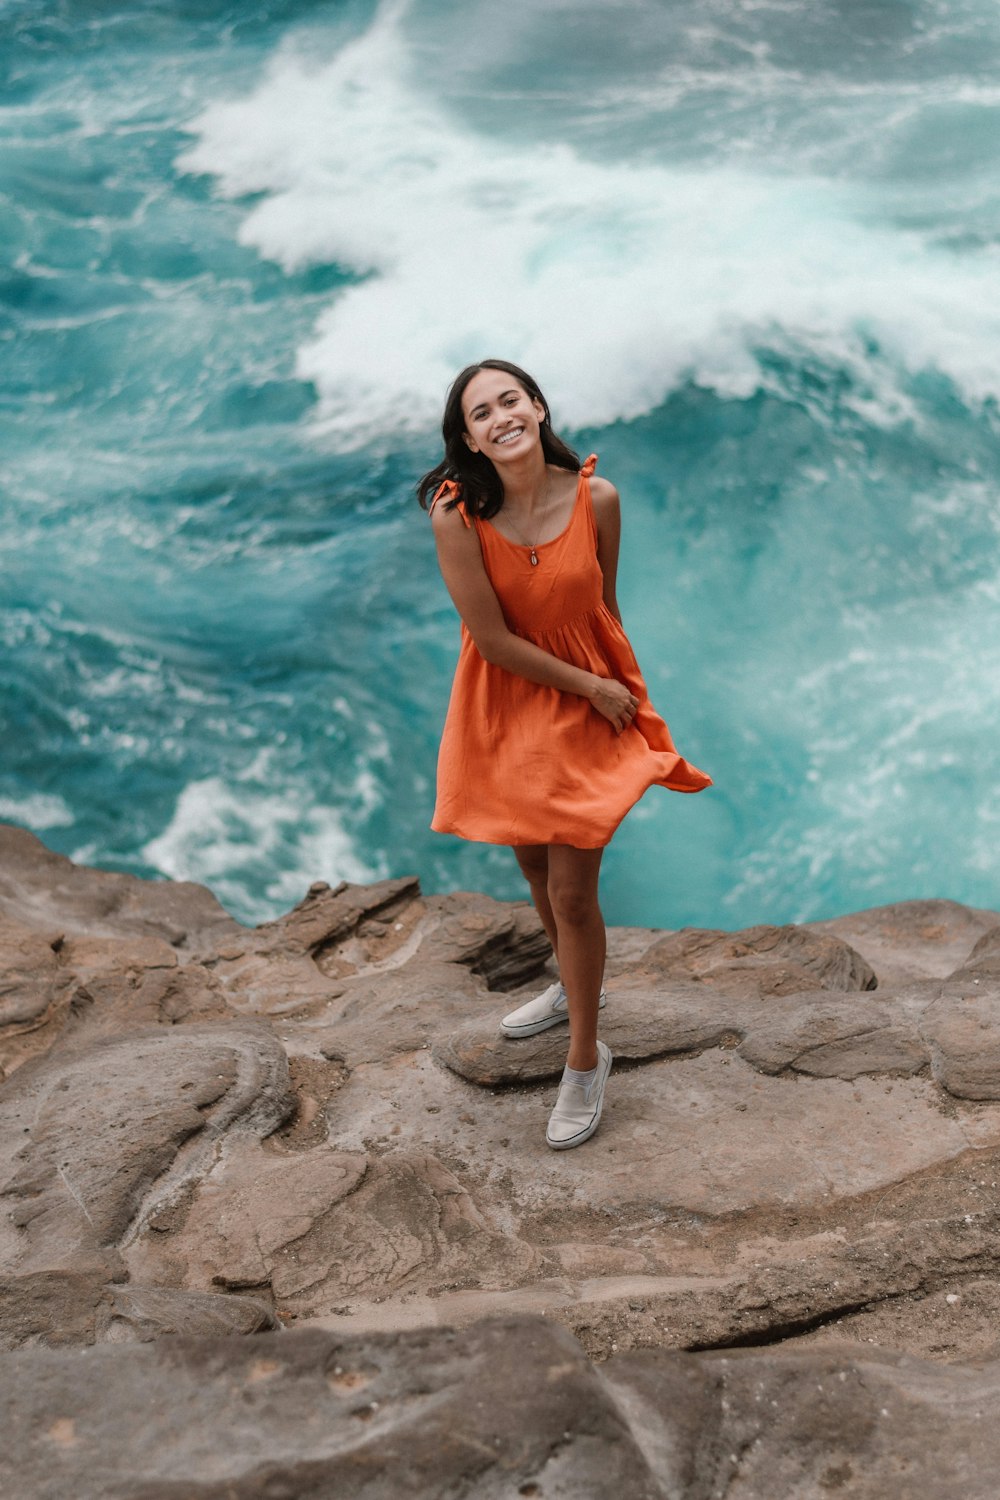 woman in orange sleeveless dress standing on rock formation near body of water during daytime